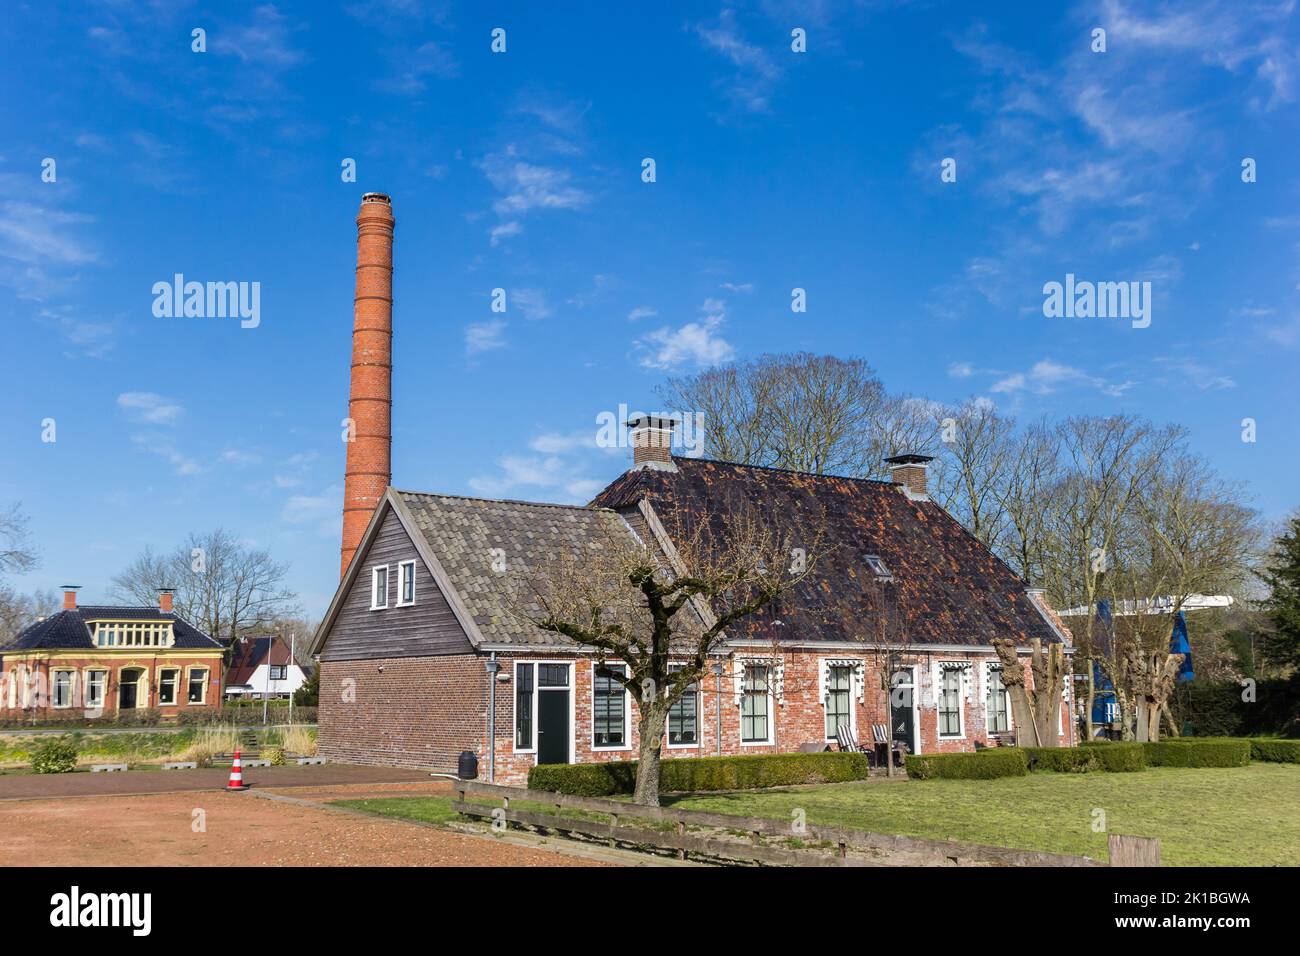 Typical dutch house in historic city Appingedam, Netherlands Stock Photo